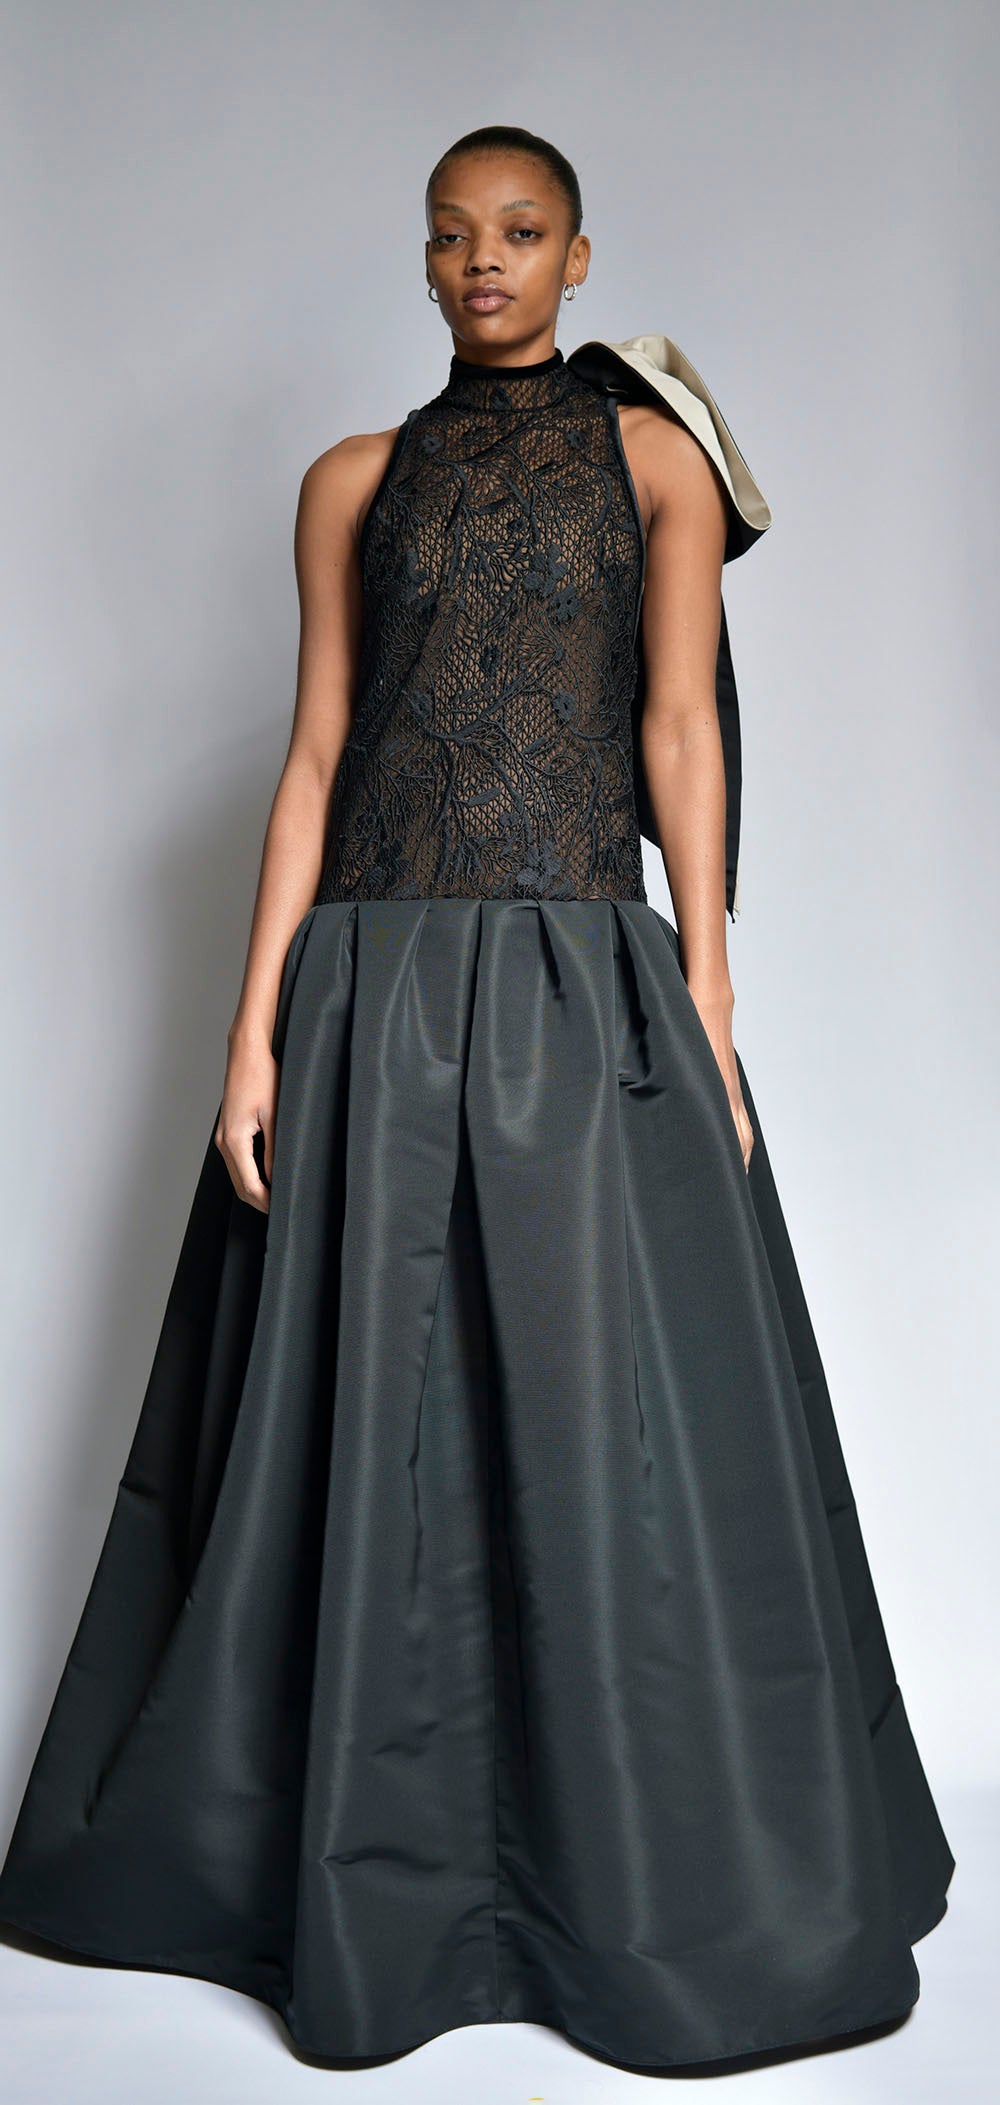 Onyx Cluny Lace Trapeze Gown with Faille Skirt and Bow Detail